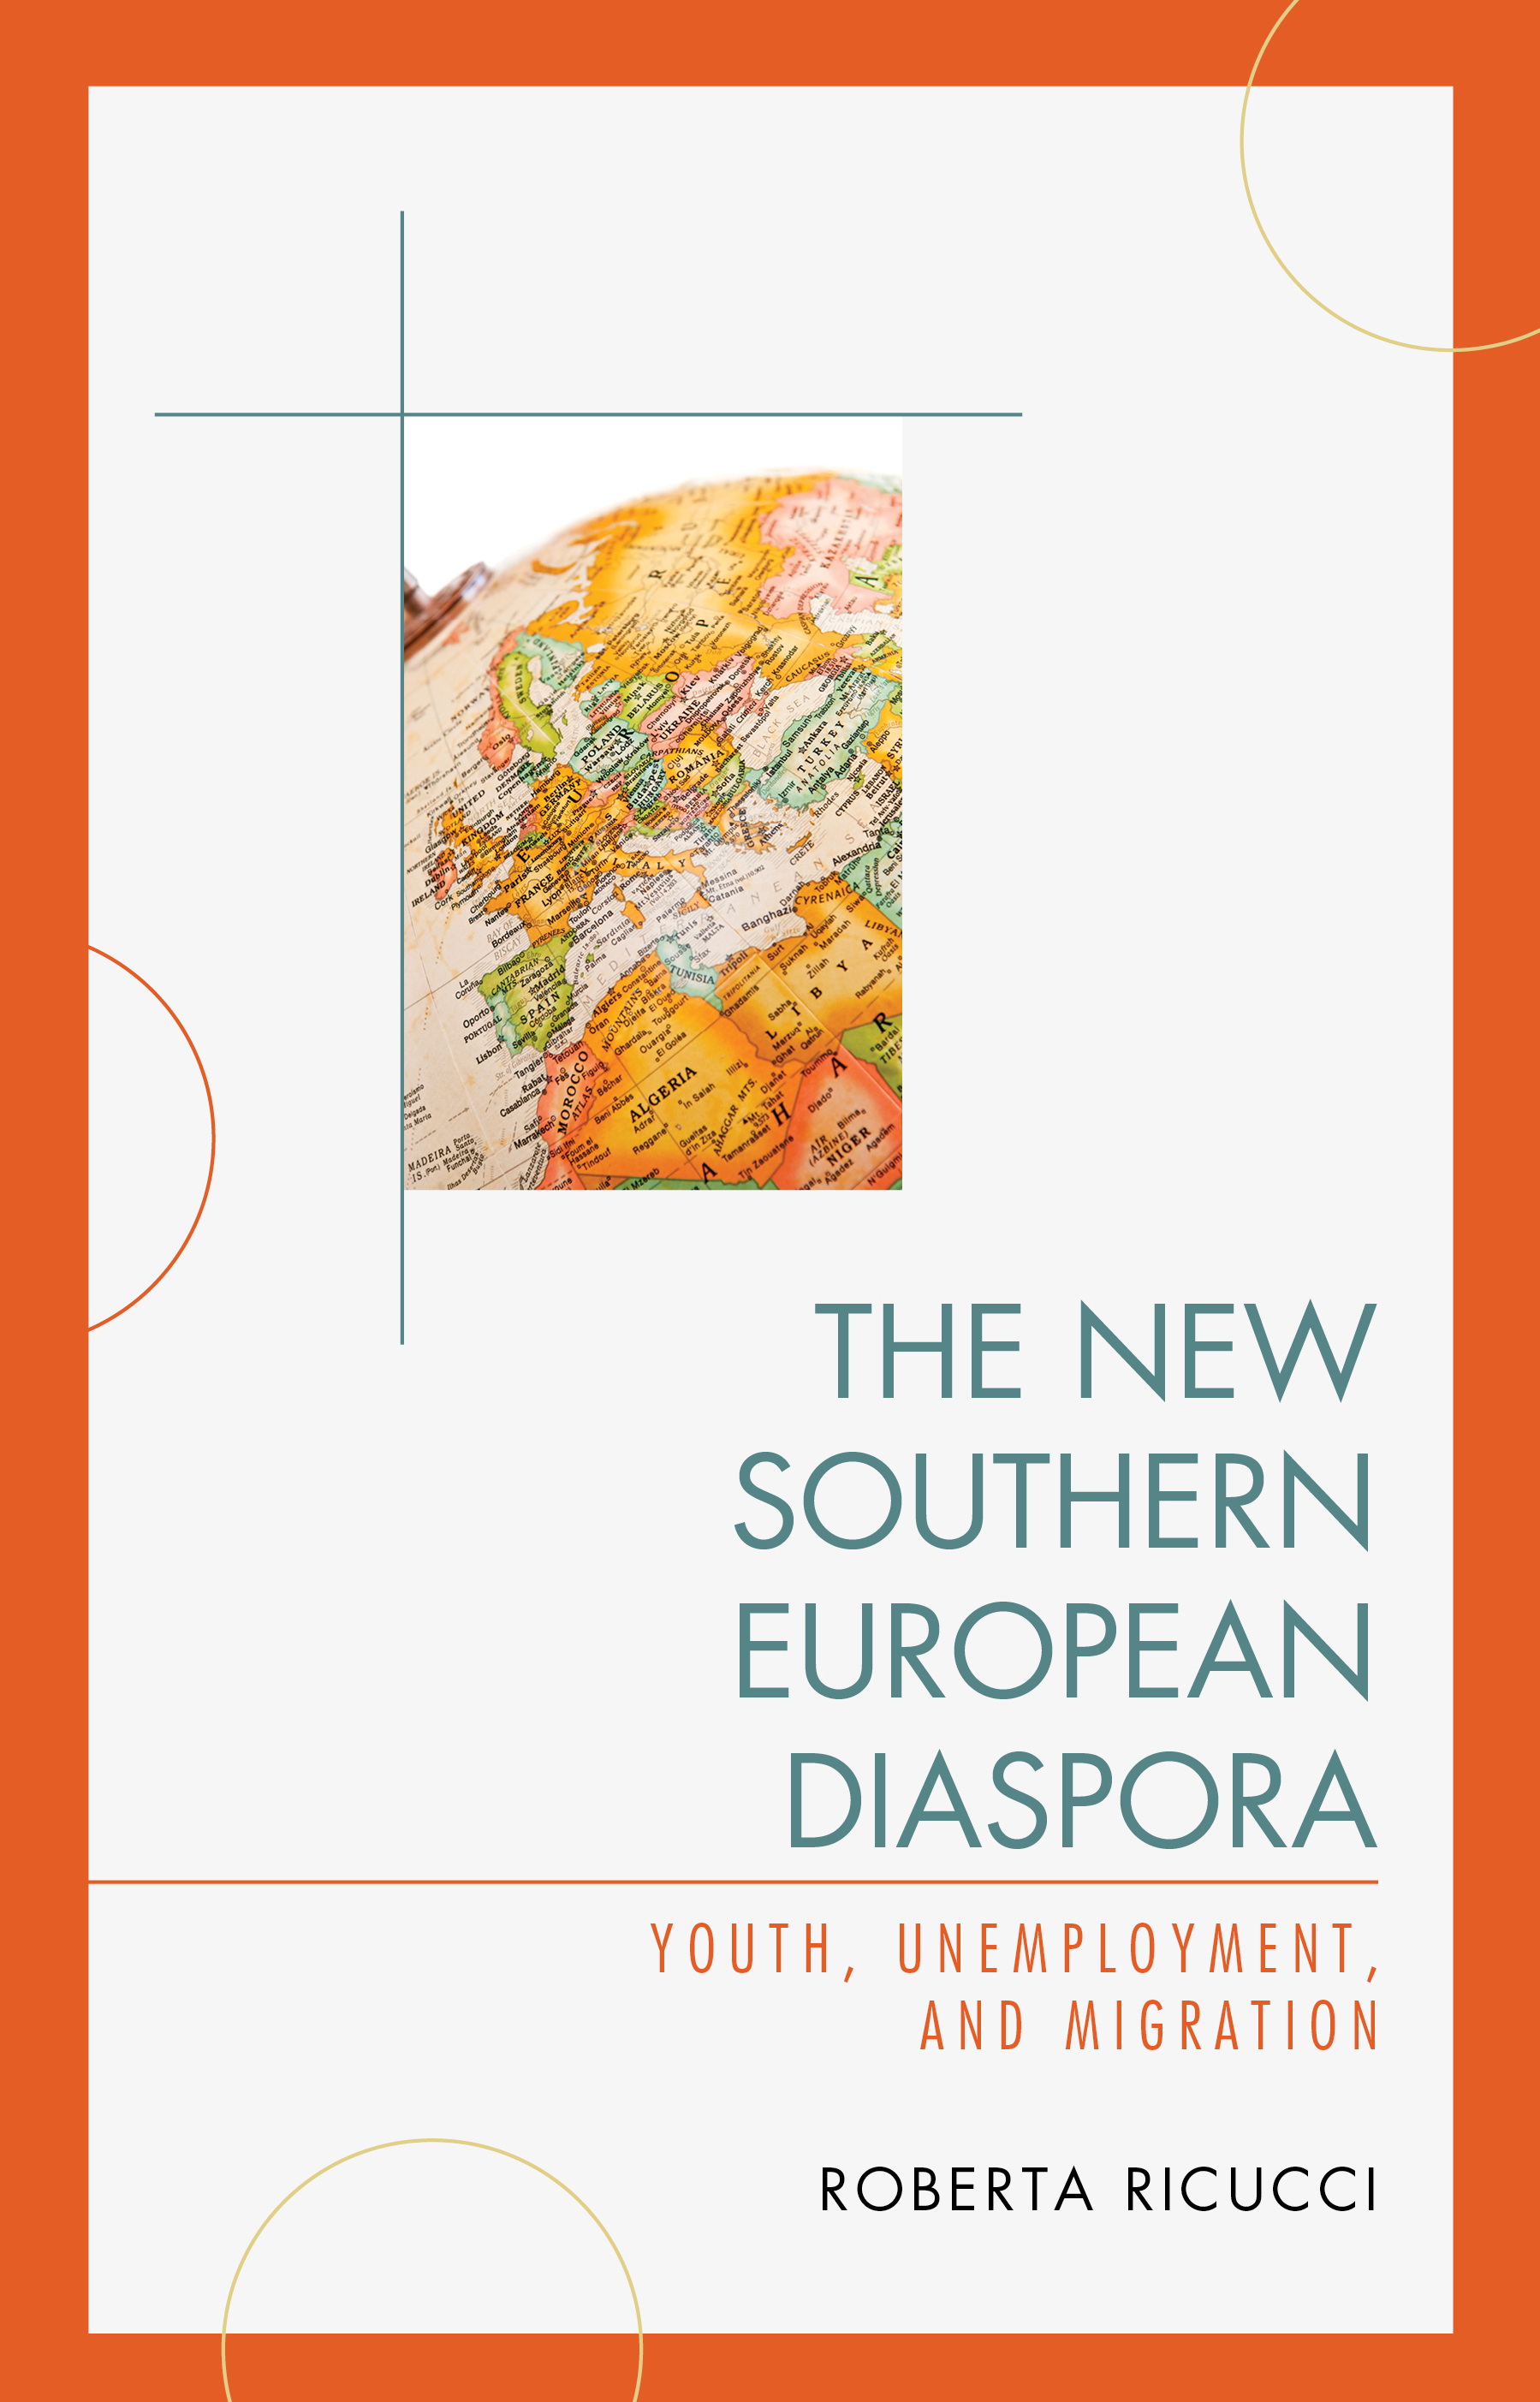 The New Southern European Diaspora: Youth, Unemployment, and Migration